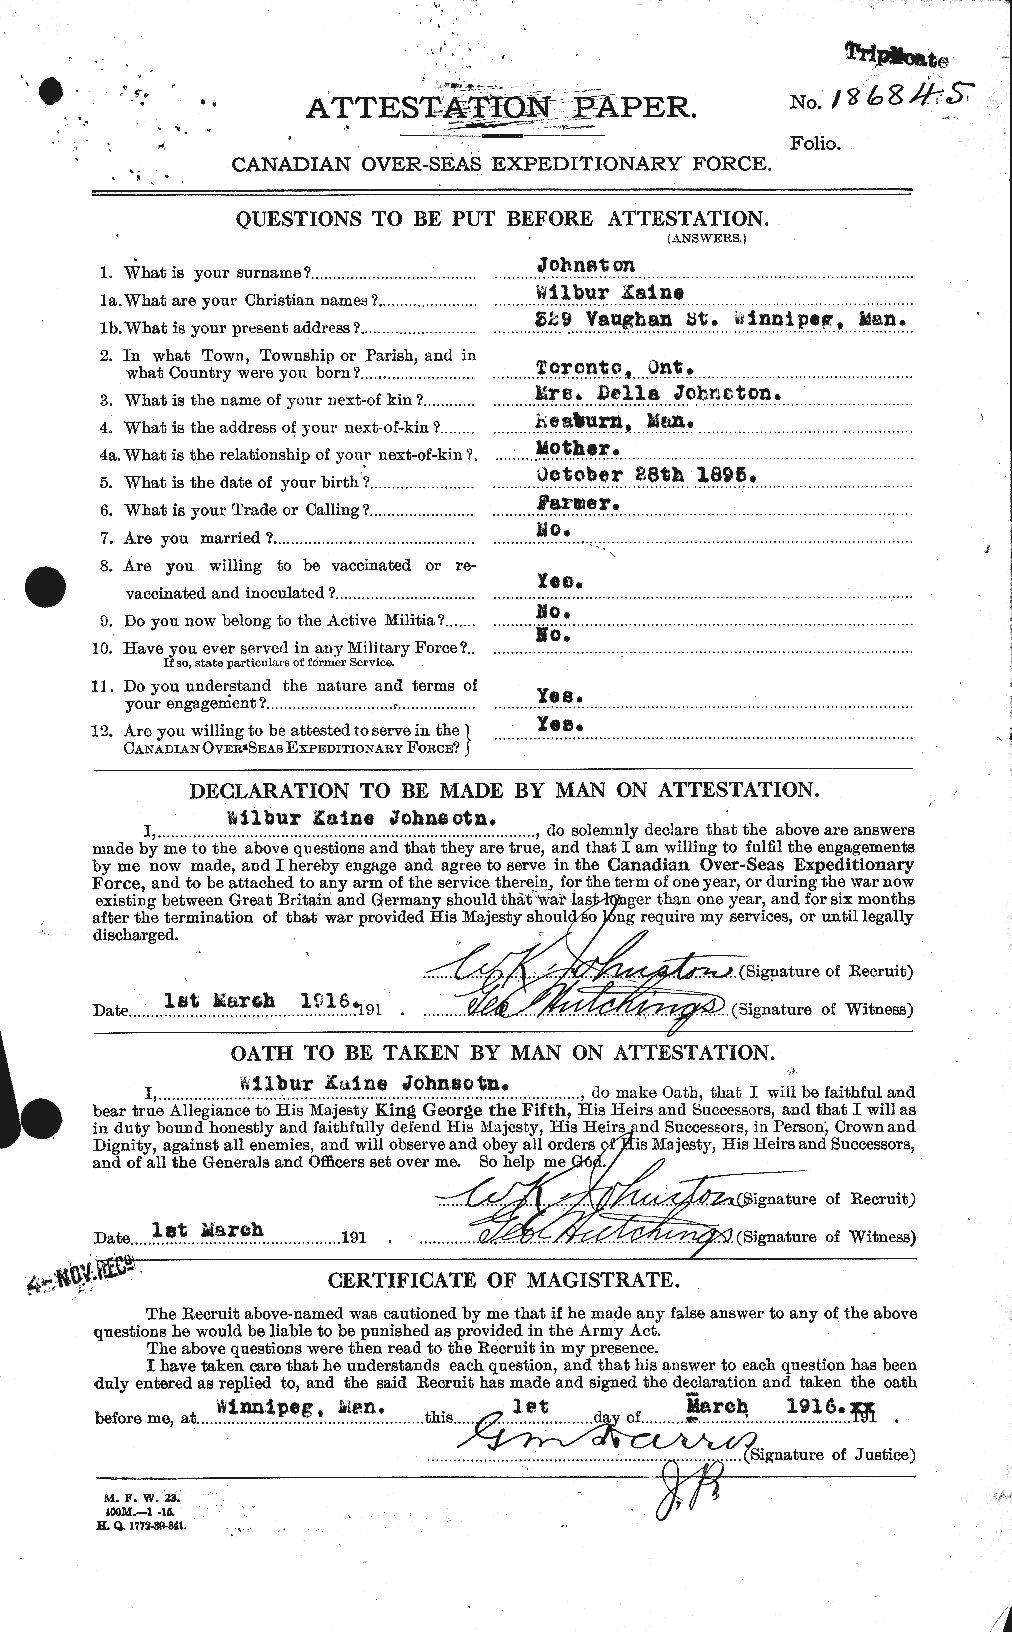 Personnel Records of the First World War - CEF 427221a